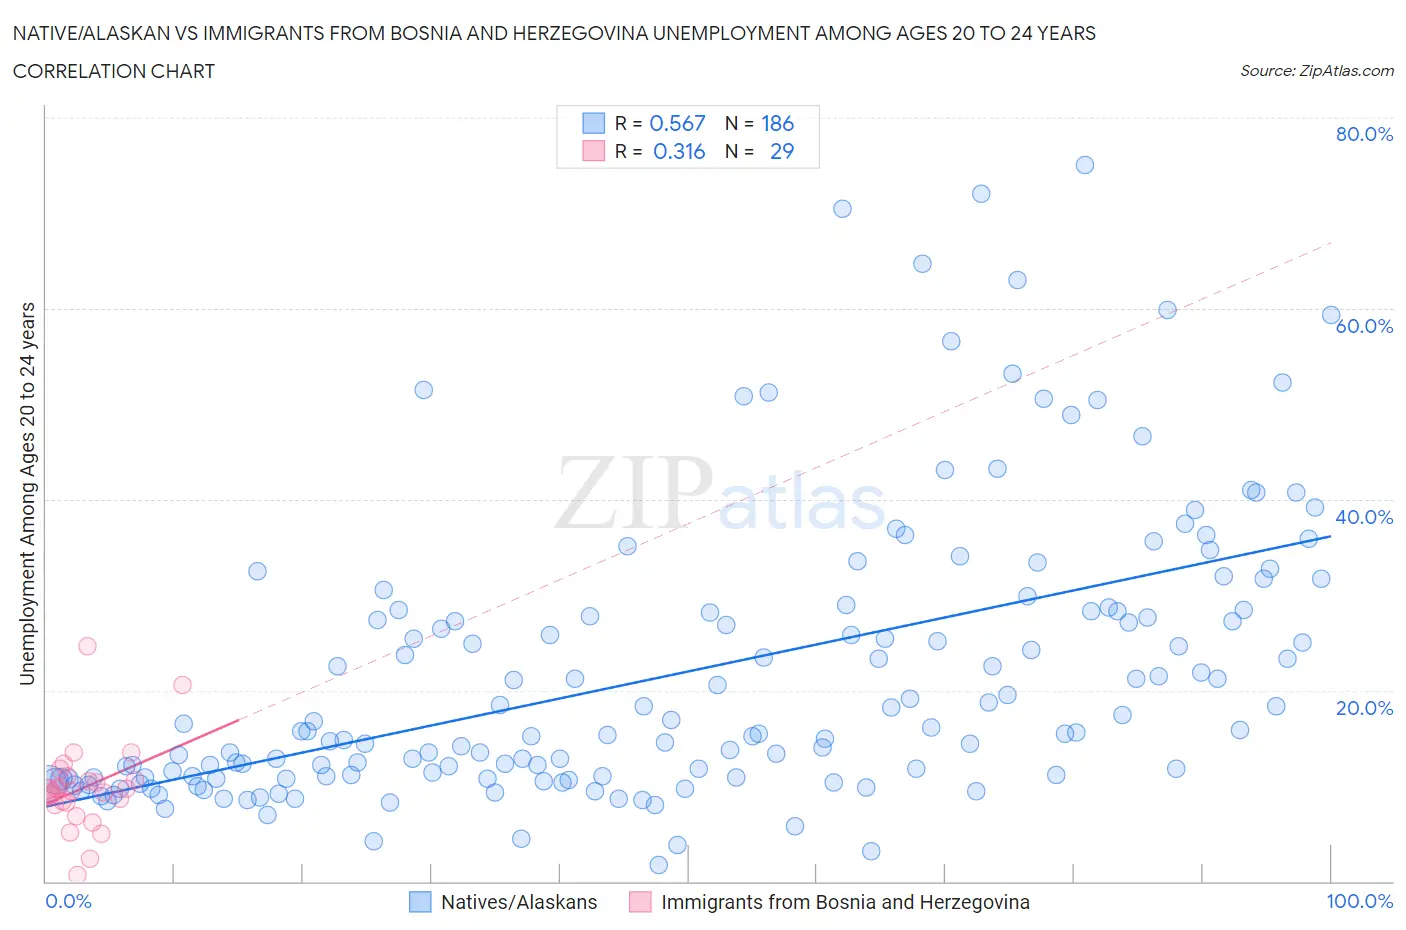 Native/Alaskan vs Immigrants from Bosnia and Herzegovina Unemployment Among Ages 20 to 24 years